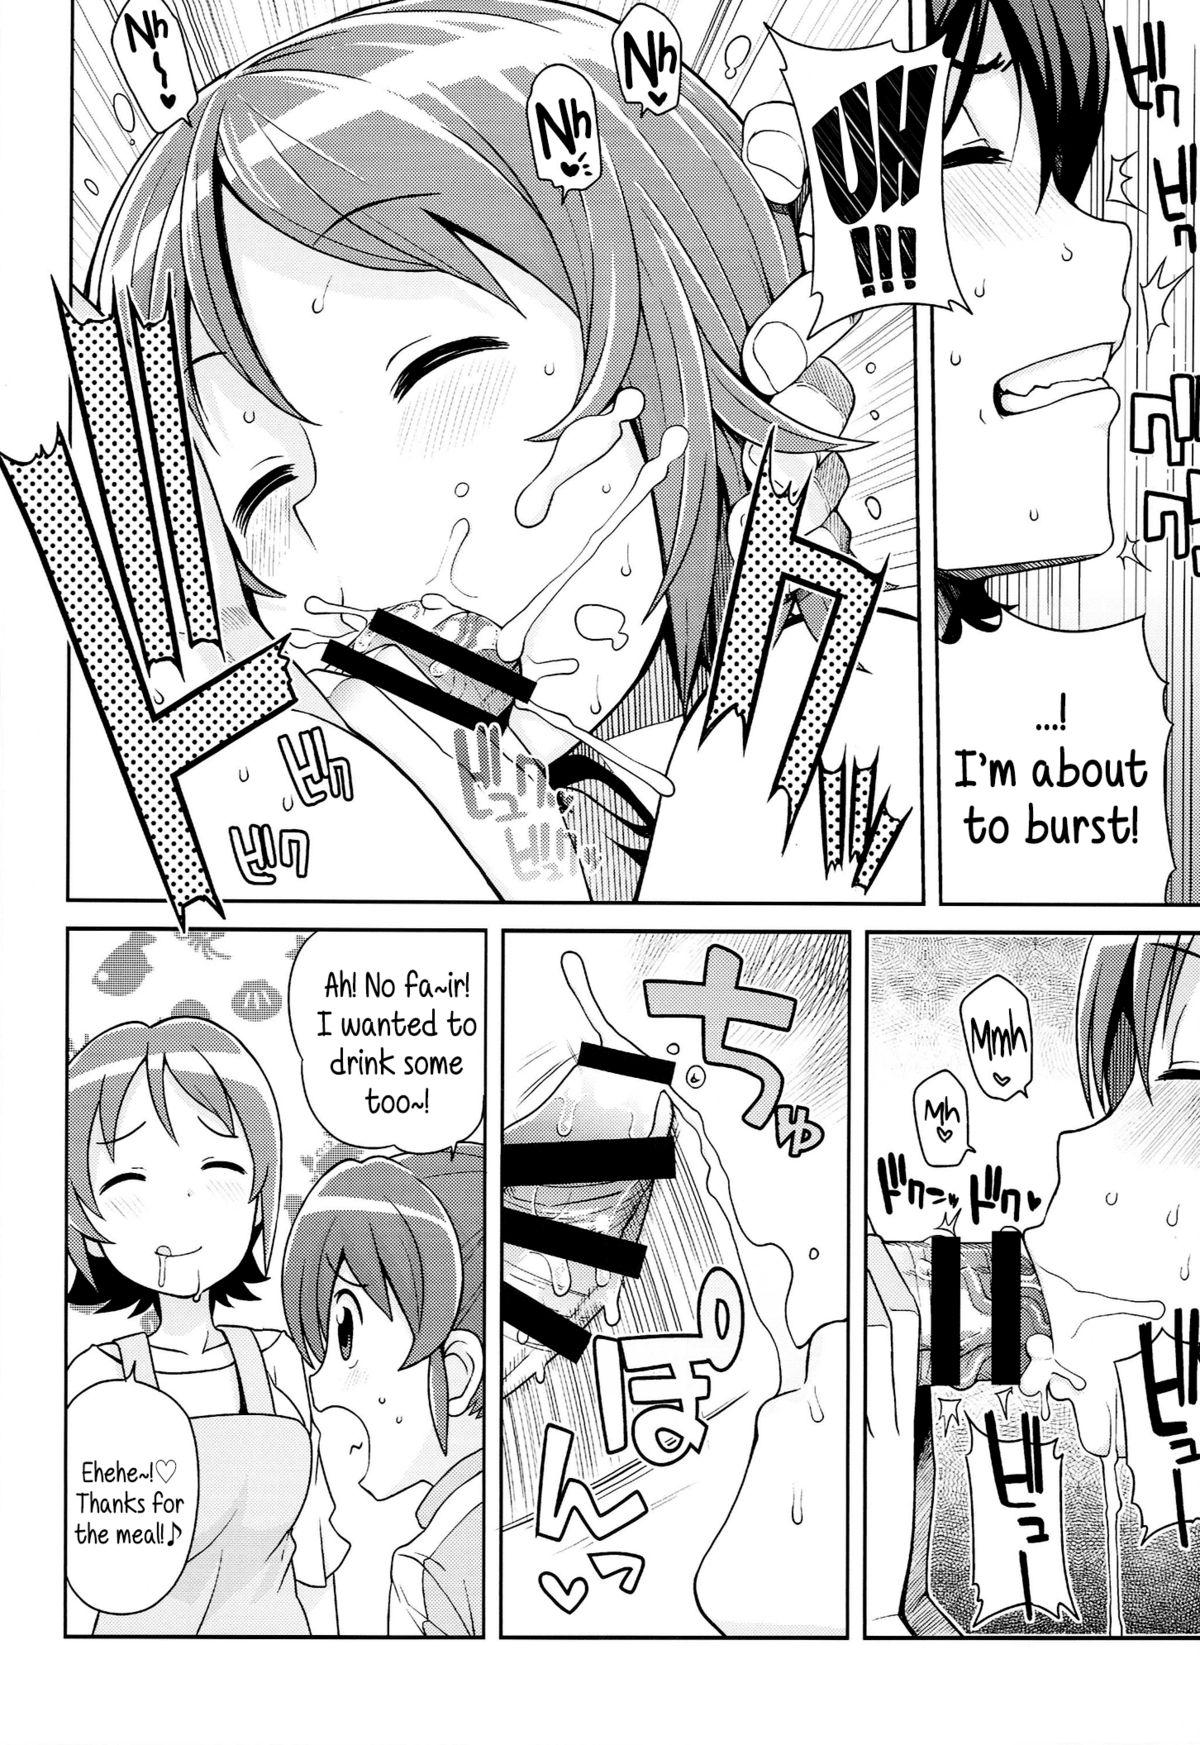 Ball Busting Chibikko Bitch Full charge - Happinesscharge precure Amatuer - Page 9